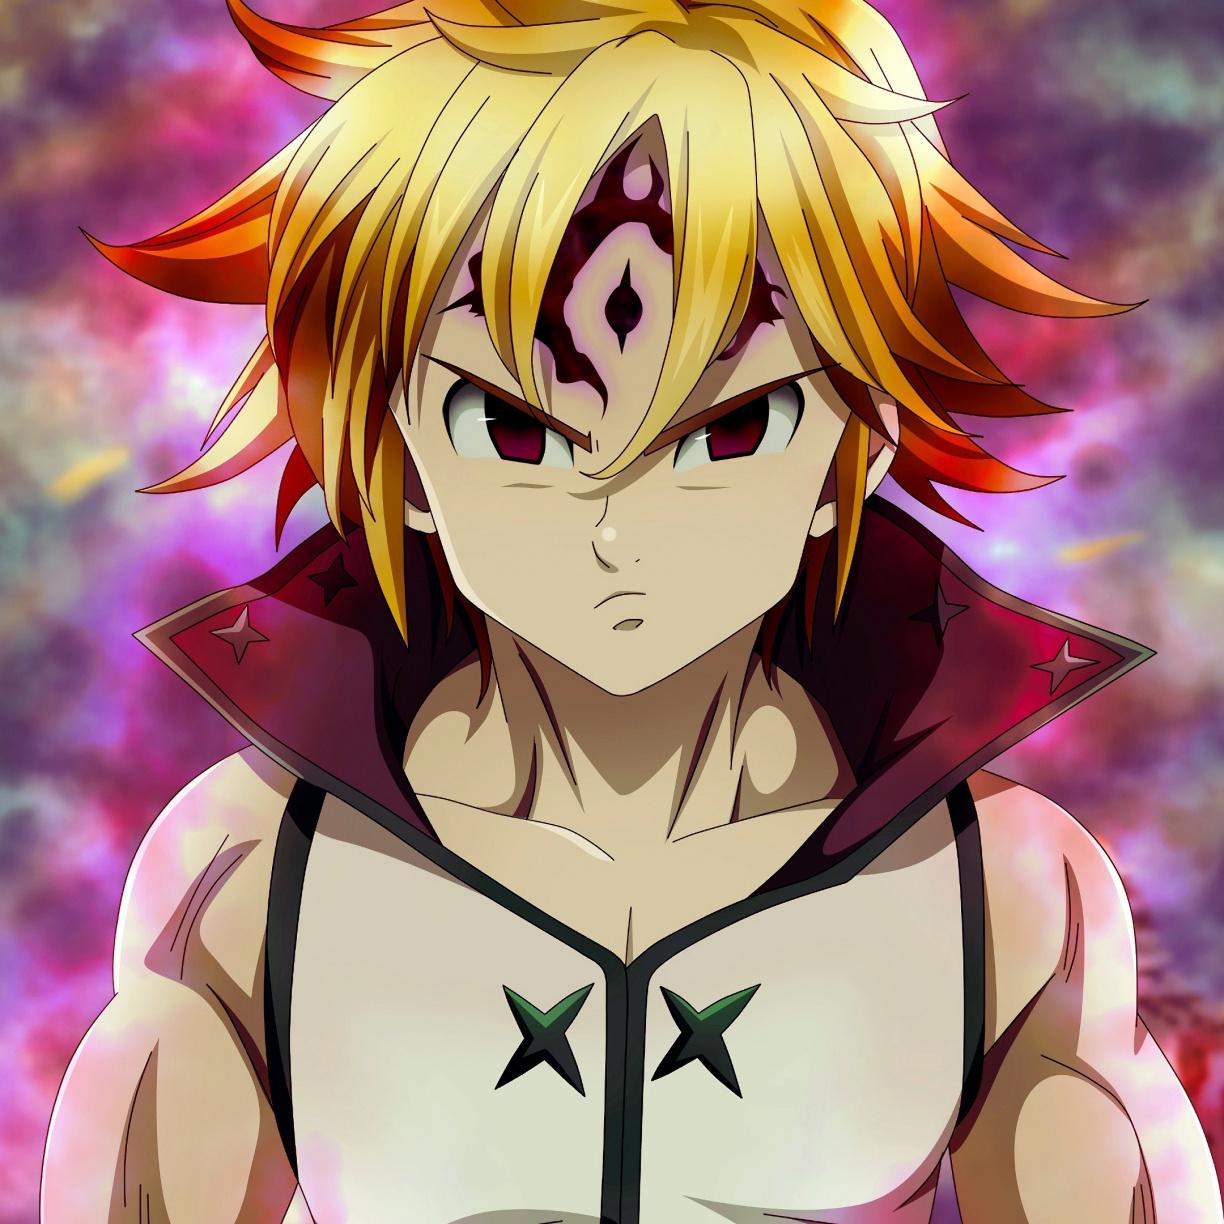 Desktop wallpapers angry, anime boy, meliodas, hd image, picture.